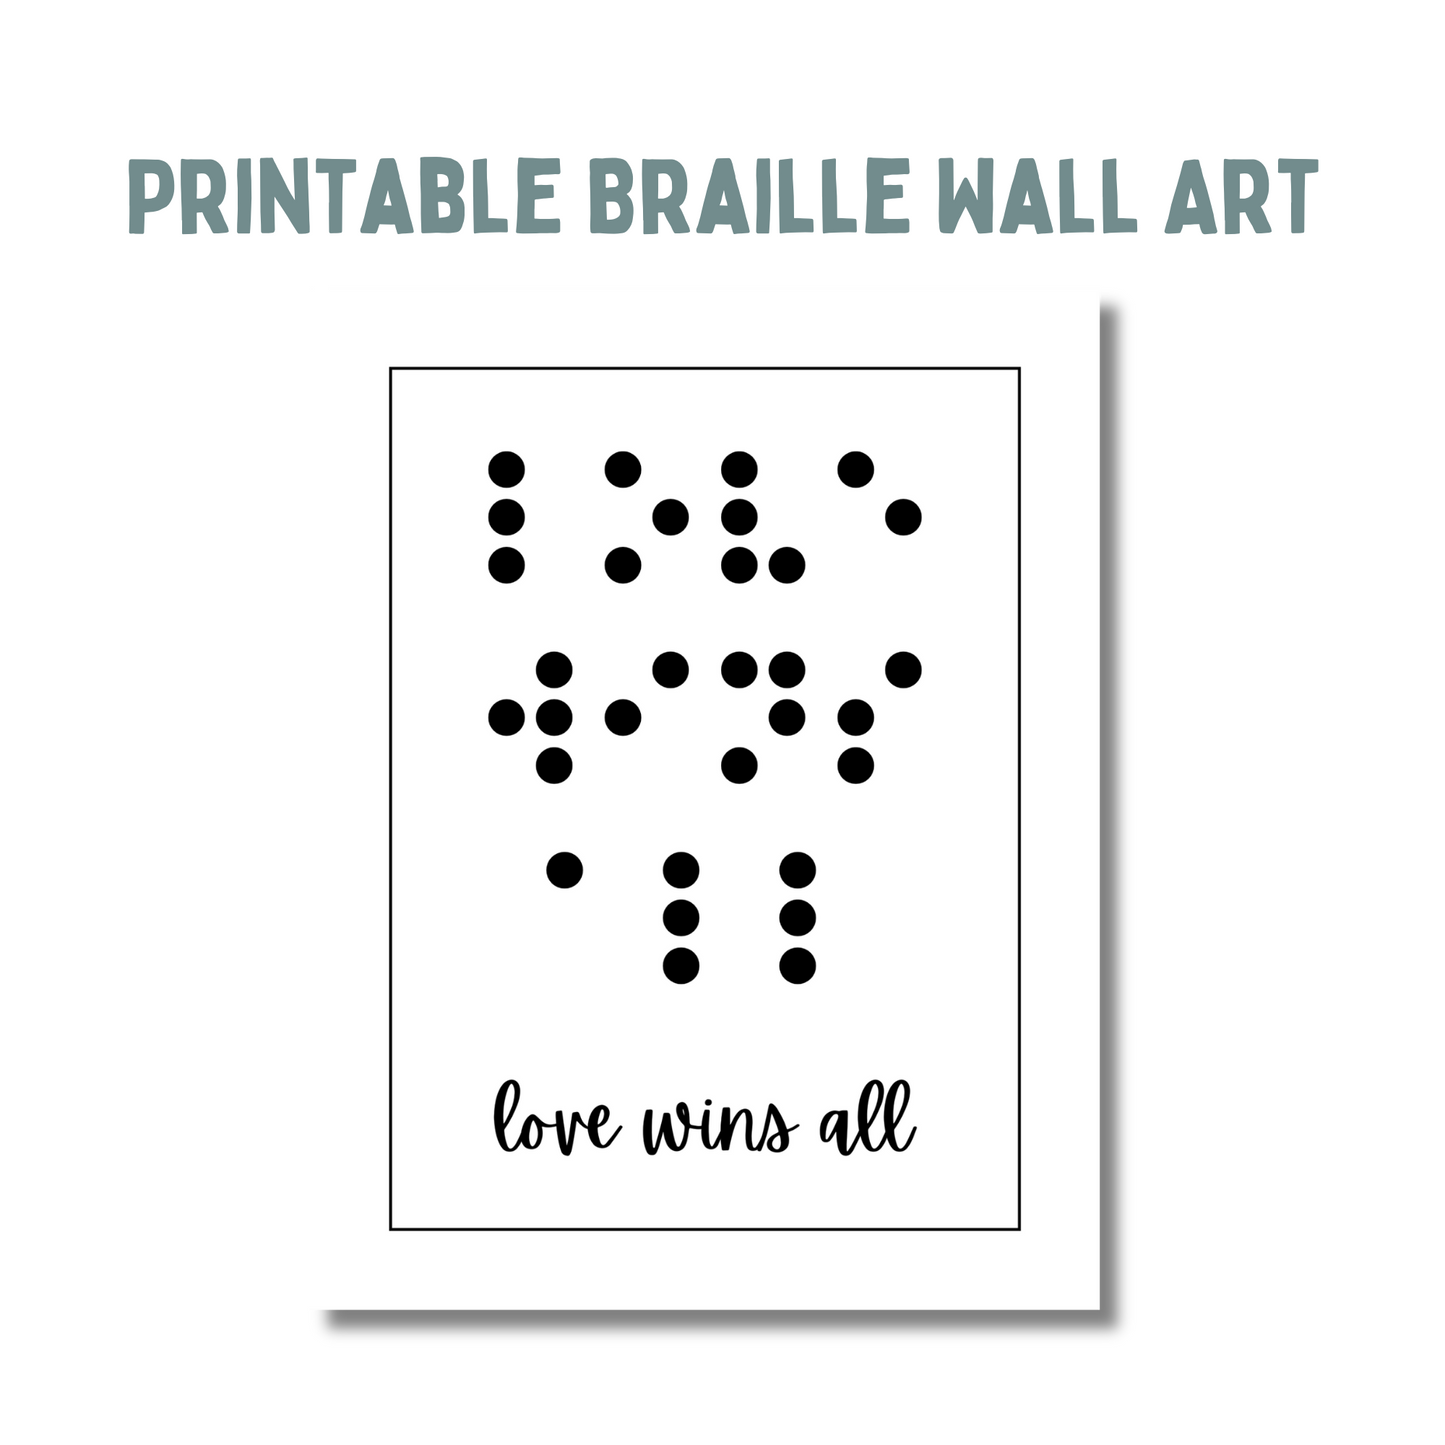 Text across the top says printable braille wall art, beneath that is an image of a portrait print saying love wins all in both braille and print. 